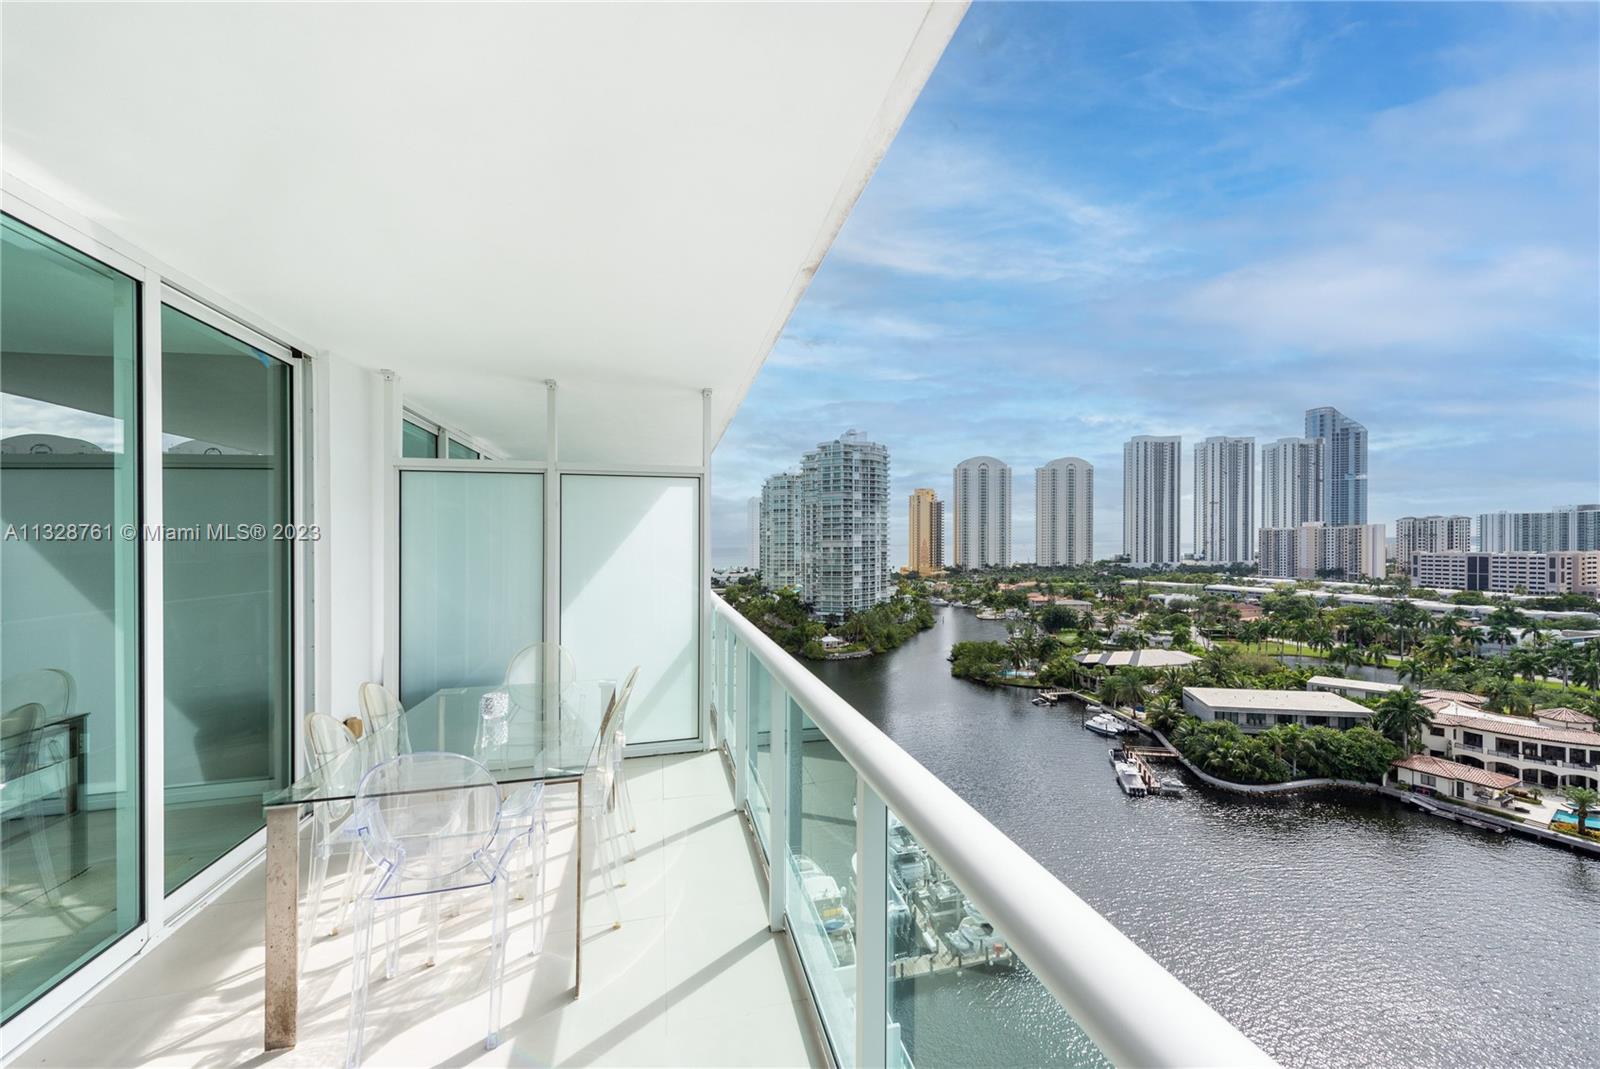 Beautiful completely furnished unit with unobstructed panoramic intracoastal water views from every room. High end property of 3 bed/2.5 baths offering all the utilities & comfort to you. Full of natural light, unit is professionally designed & finished with Porcelain floor. Building is located in less than 5 miles to Bal Barbour & Aventura Mall. Minimum 4 months lease. VACANT & EASY TO SHOW. Listing Price is for annual rent. Rental Price for the period of Nov - March is $8000 per month.